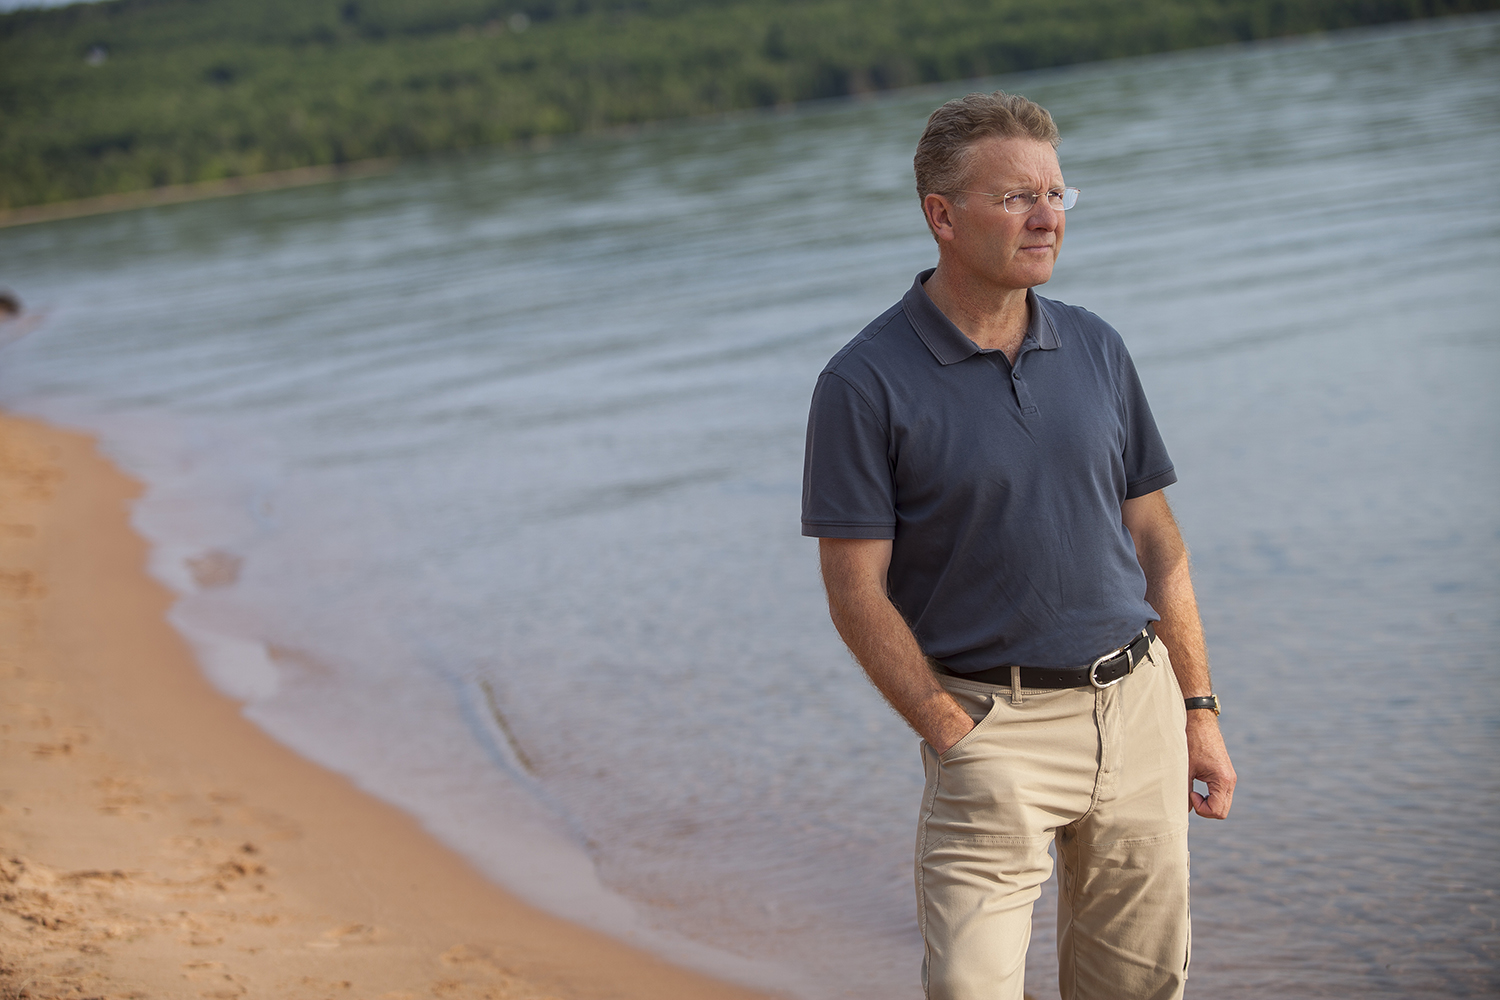 Peter Annin [AN-nihn] is the director of the Mary Griggs Burke Center for Freshwater Innovation at Northland College in Ashland. He is the author of “Purified: How Recycled Sewage Is Transforming Our Water.”